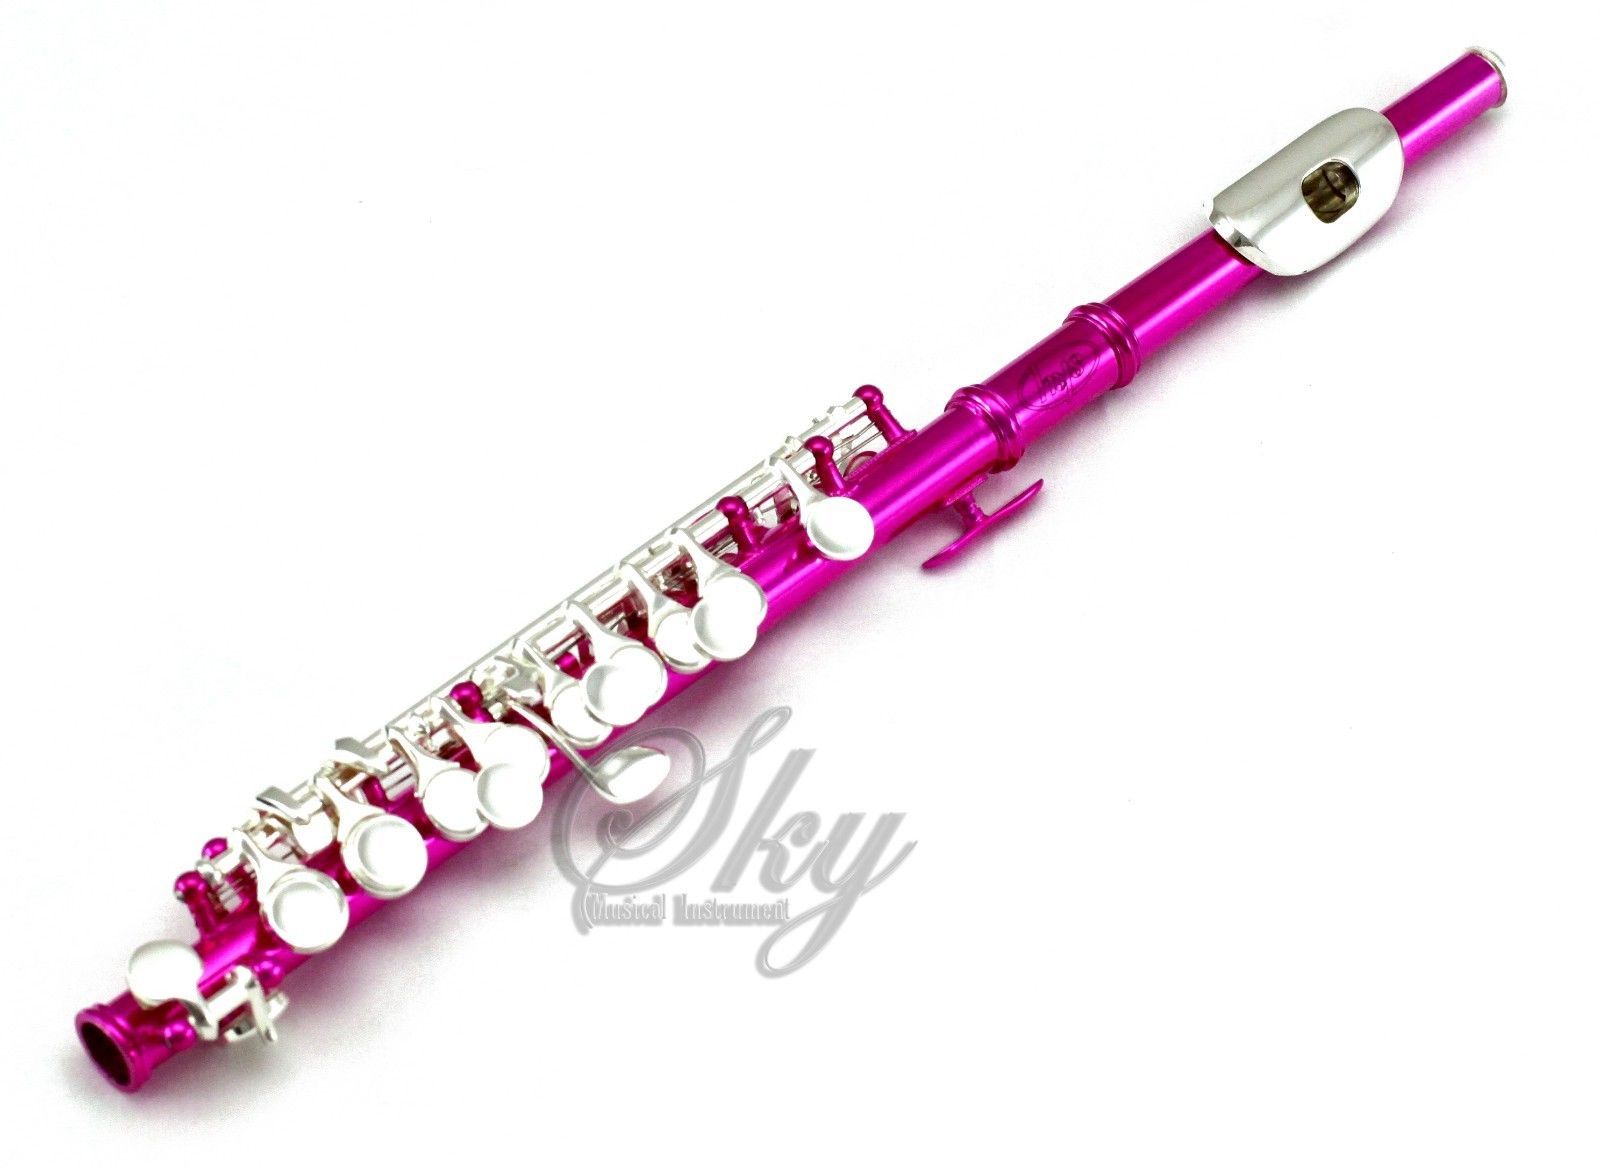 END-OF-YEAR-SALE! Band Approved SKY Hot Pink Piccolo w Gold Keys Limited! - $119.99